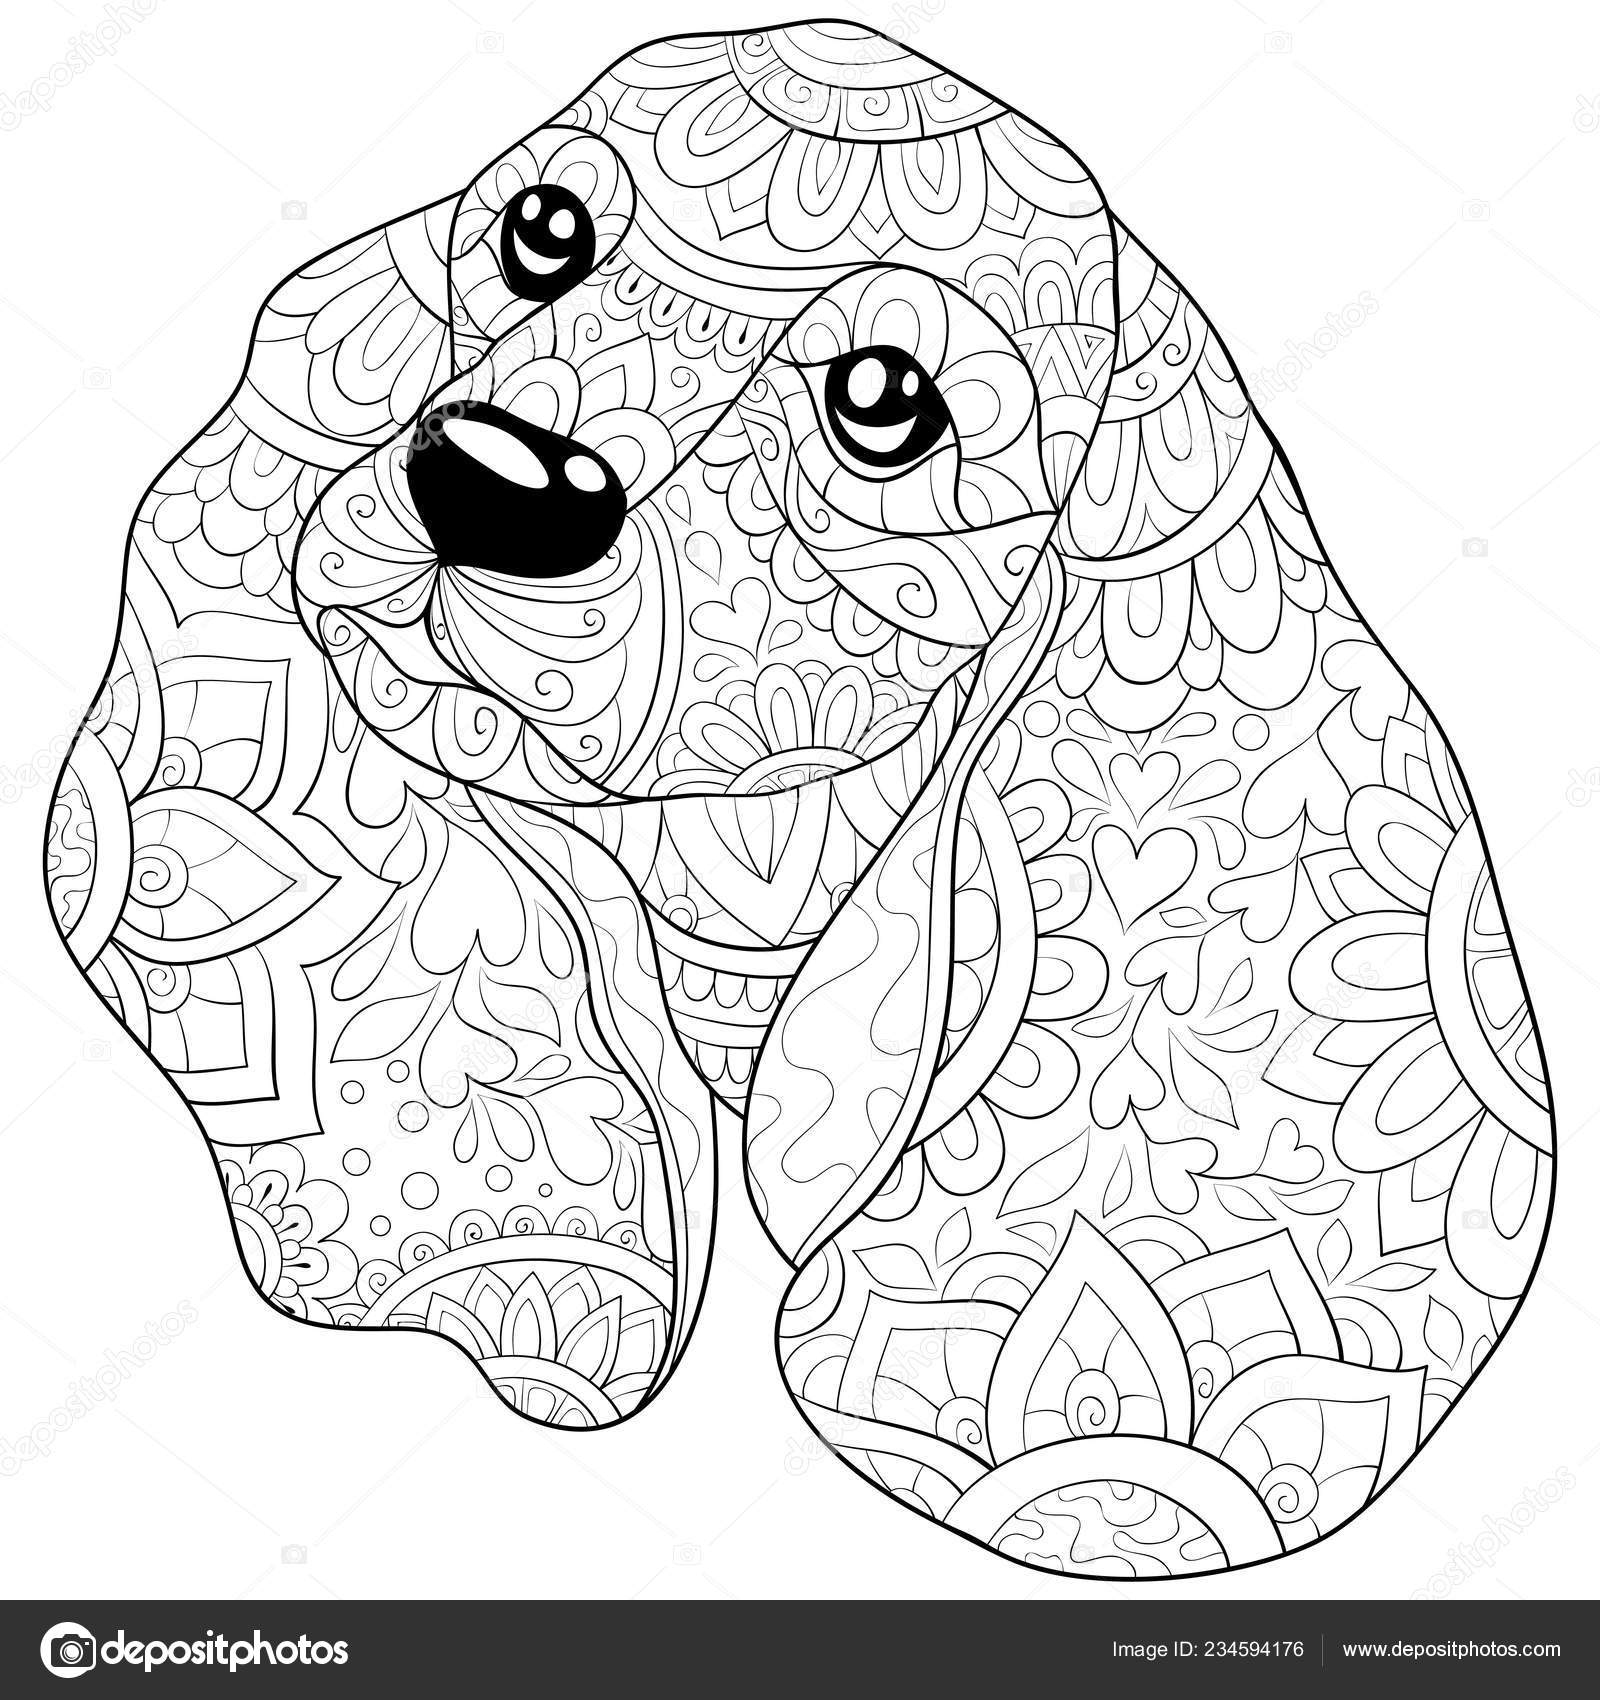 Adult coloring bookpage a cute dog with ornaments Vector Image